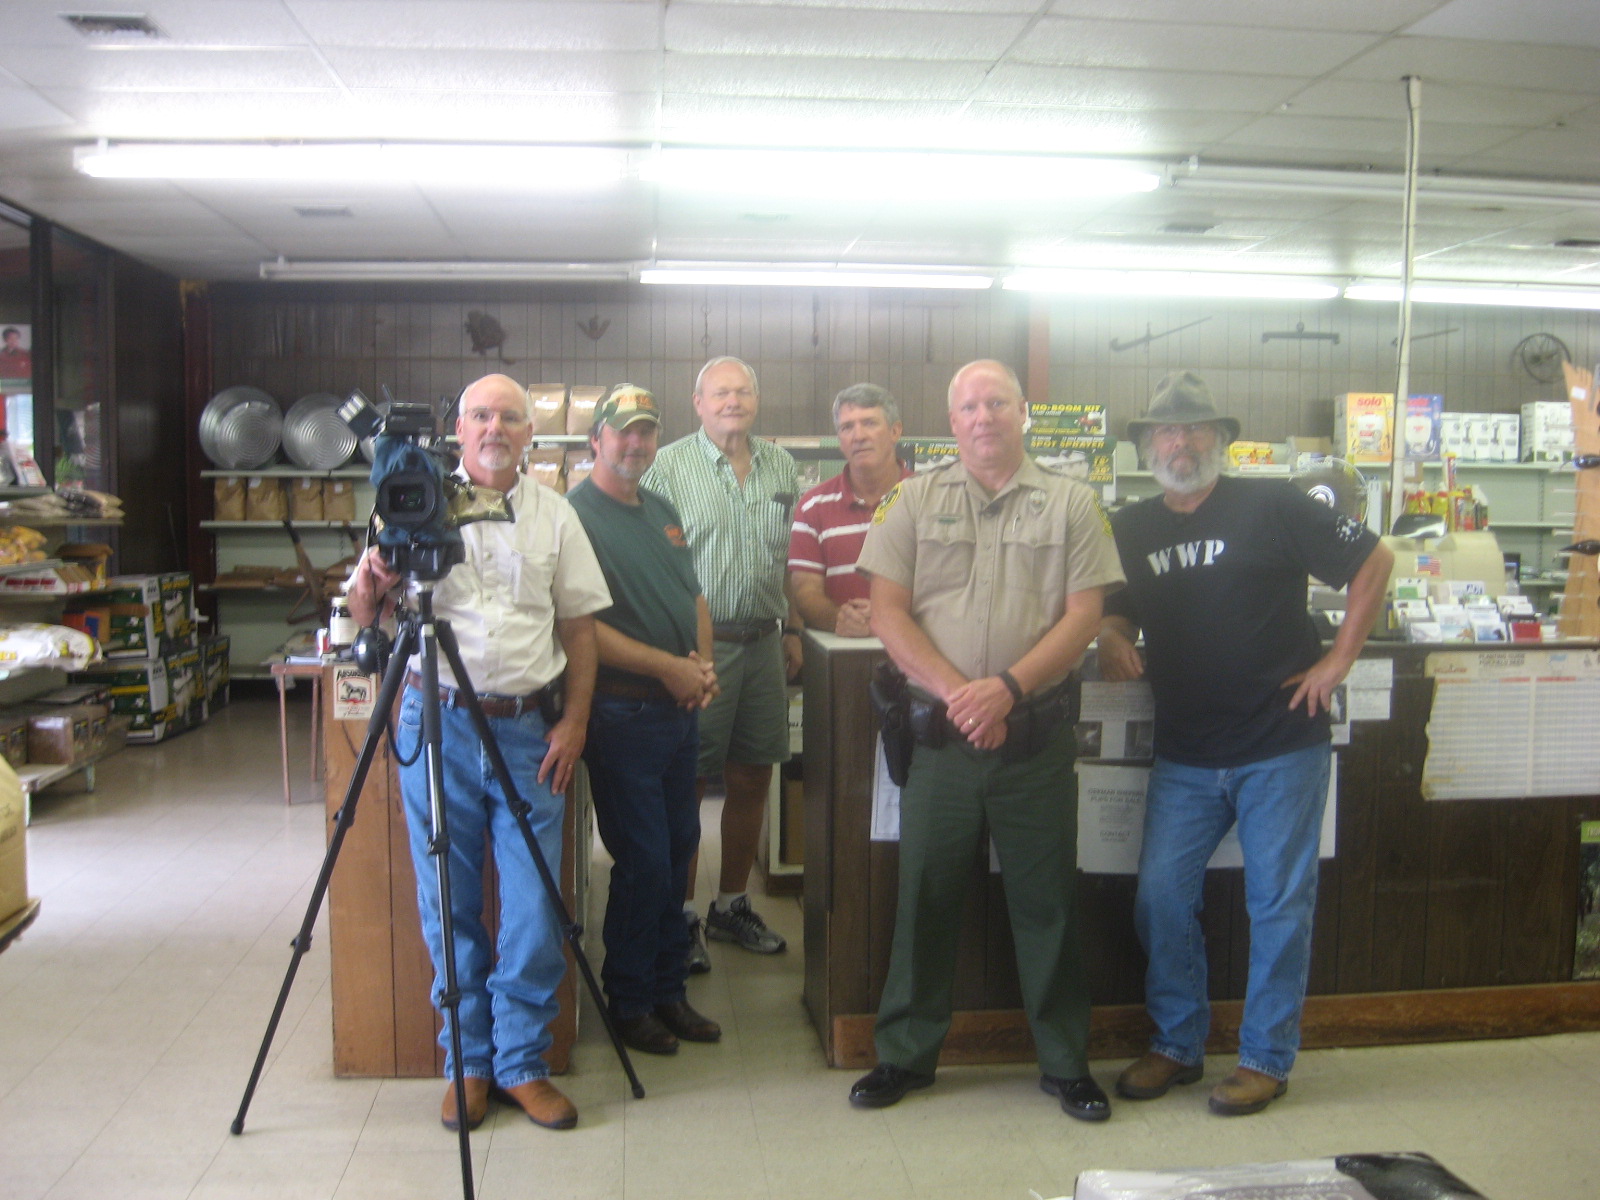 Here's a group shot from the BKM Outdoors shoot. Curt Gantt, Brian Keith, Seth, Steve, Warden Keith Mann, Don Day